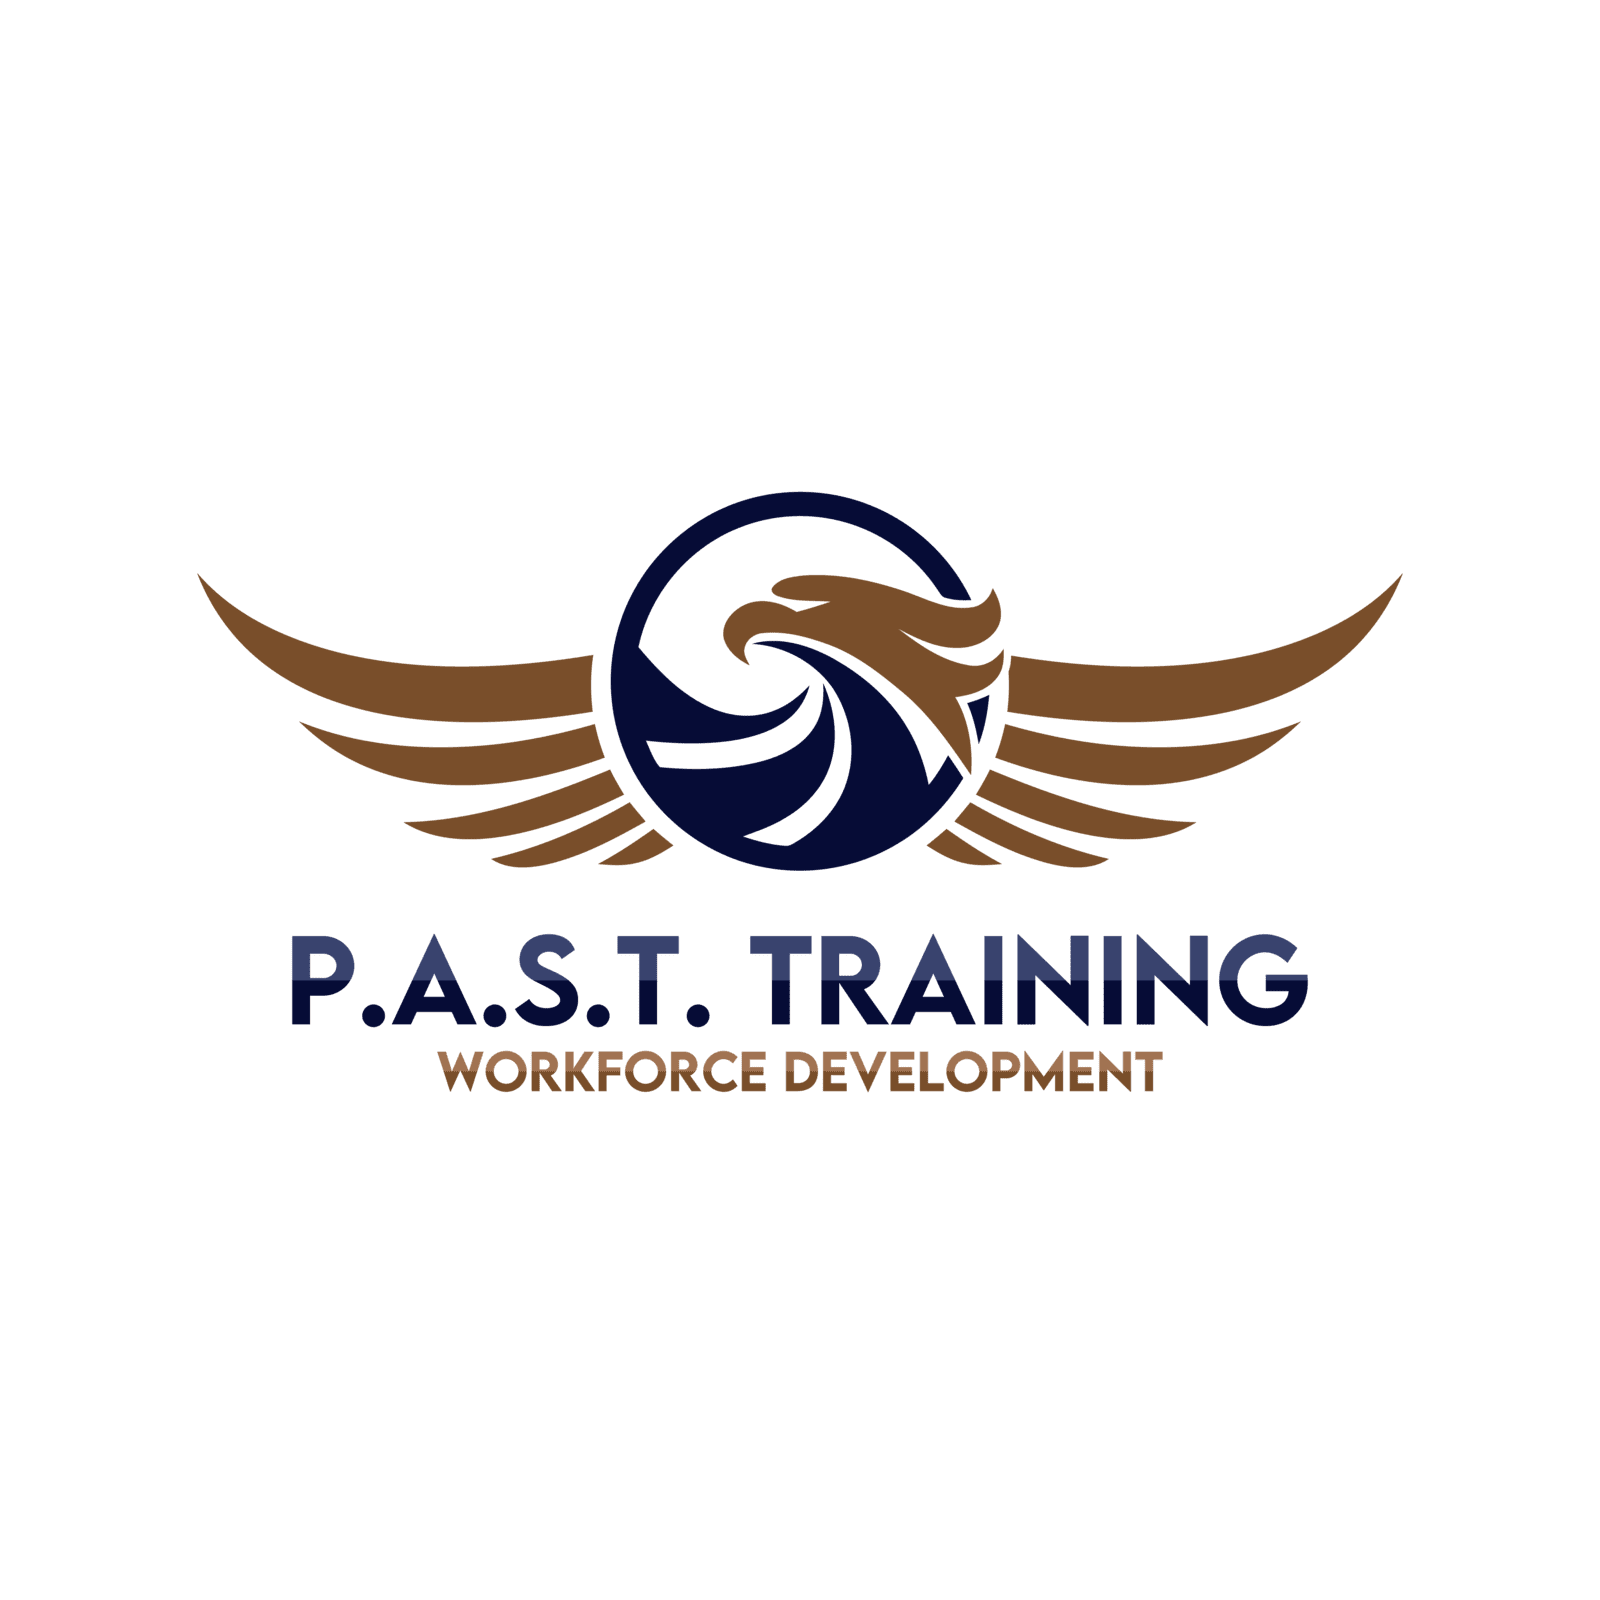 P.A.S.T. Training